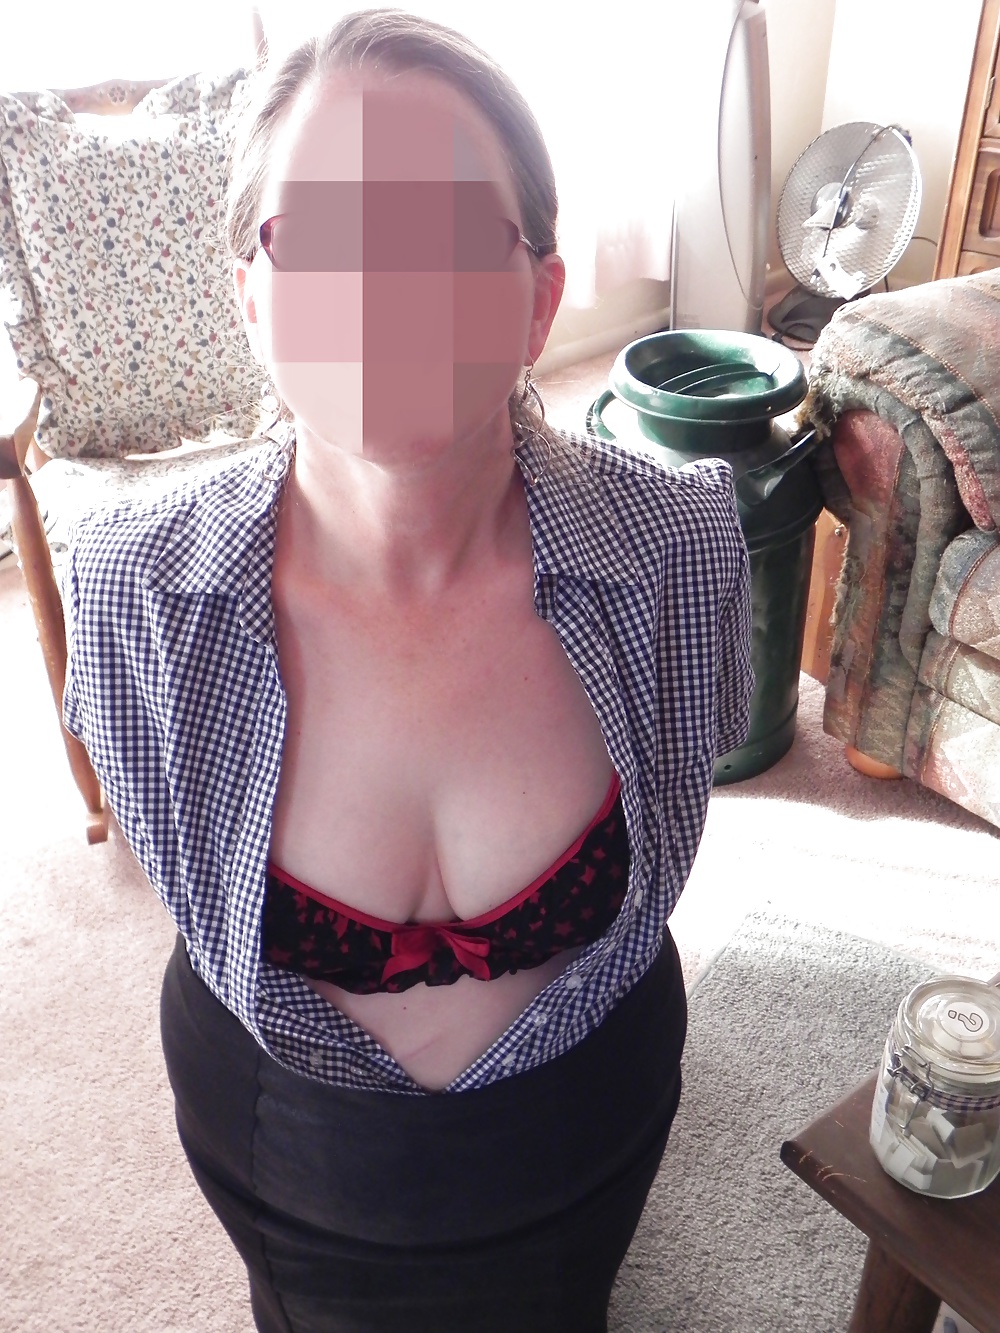 Sex Another fun afternoon with my sexy Mormon MILF image